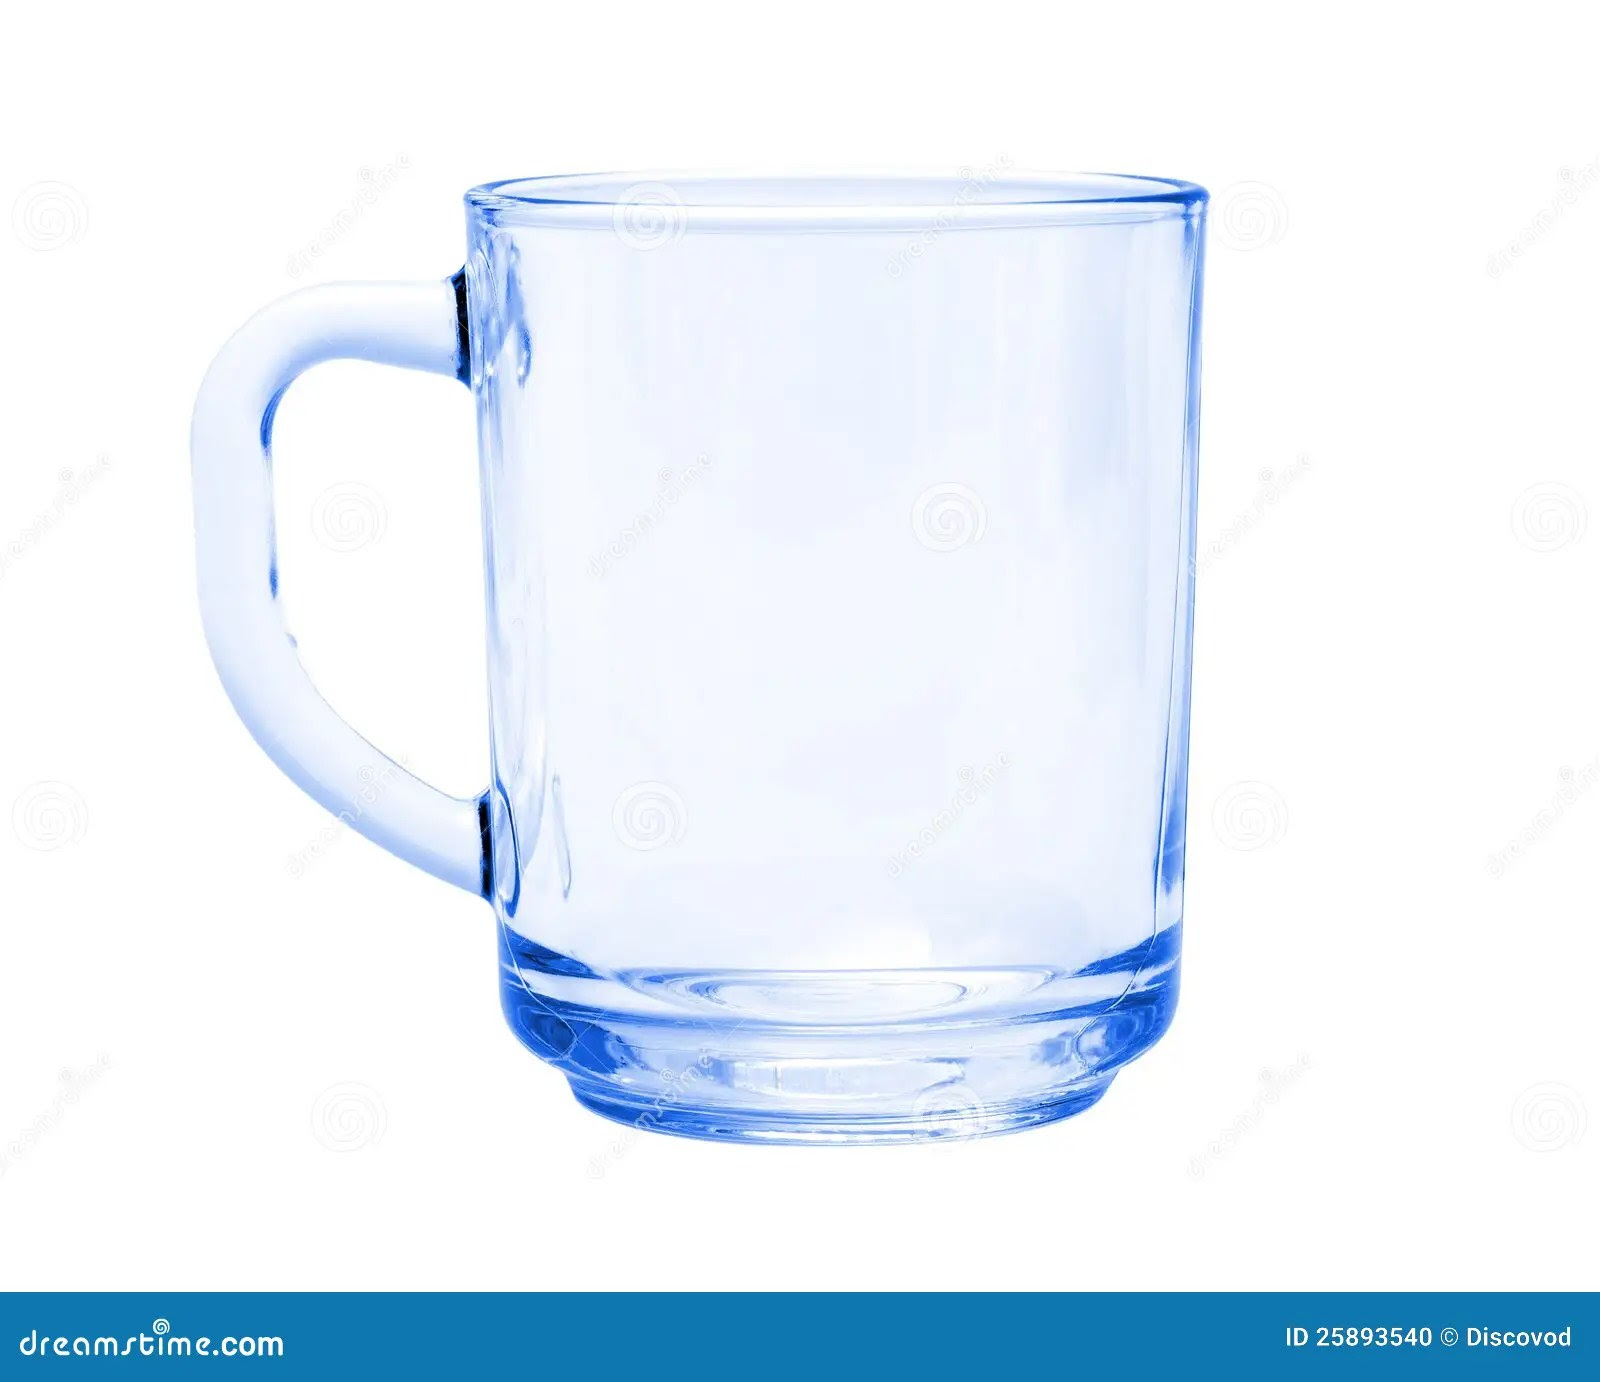 Empty Blue Glass Cup Stock Photo Image 25893540